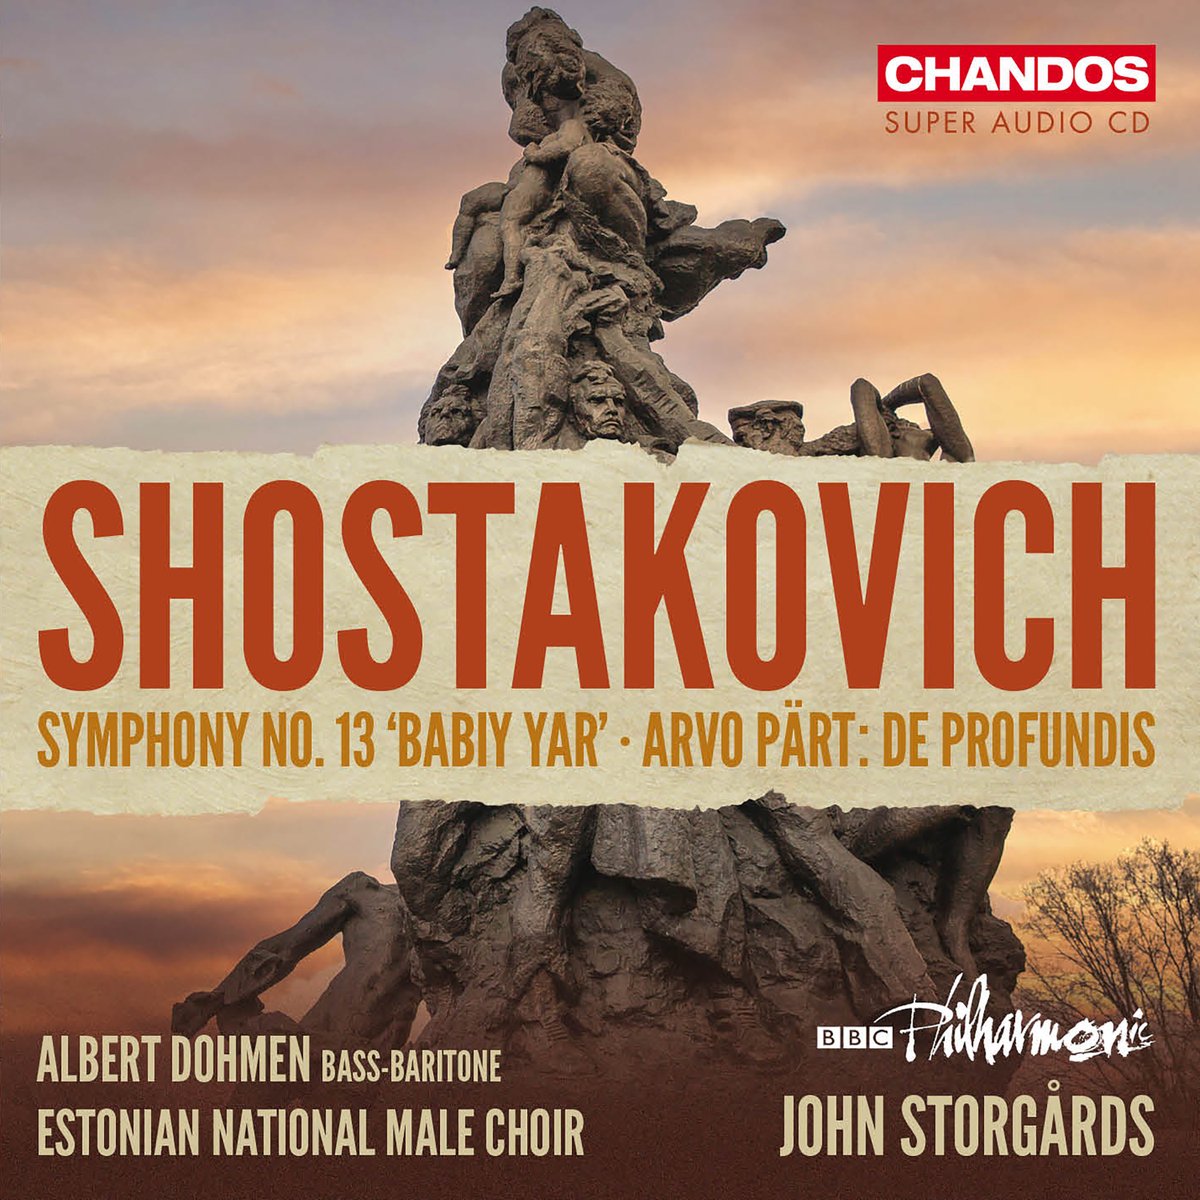 We're kicking Friday off with a fresh new release from BBC Philharmonic and John Storgårds joined by the bass-baritone Albert Dohmen and the Estonian National Male Choir 💿✨ Shostakovich: Symphony No.13 'Babiy Yar' and Pärt: De profundis, out now! 👉lnk.to/CHAN5335FA?utm…